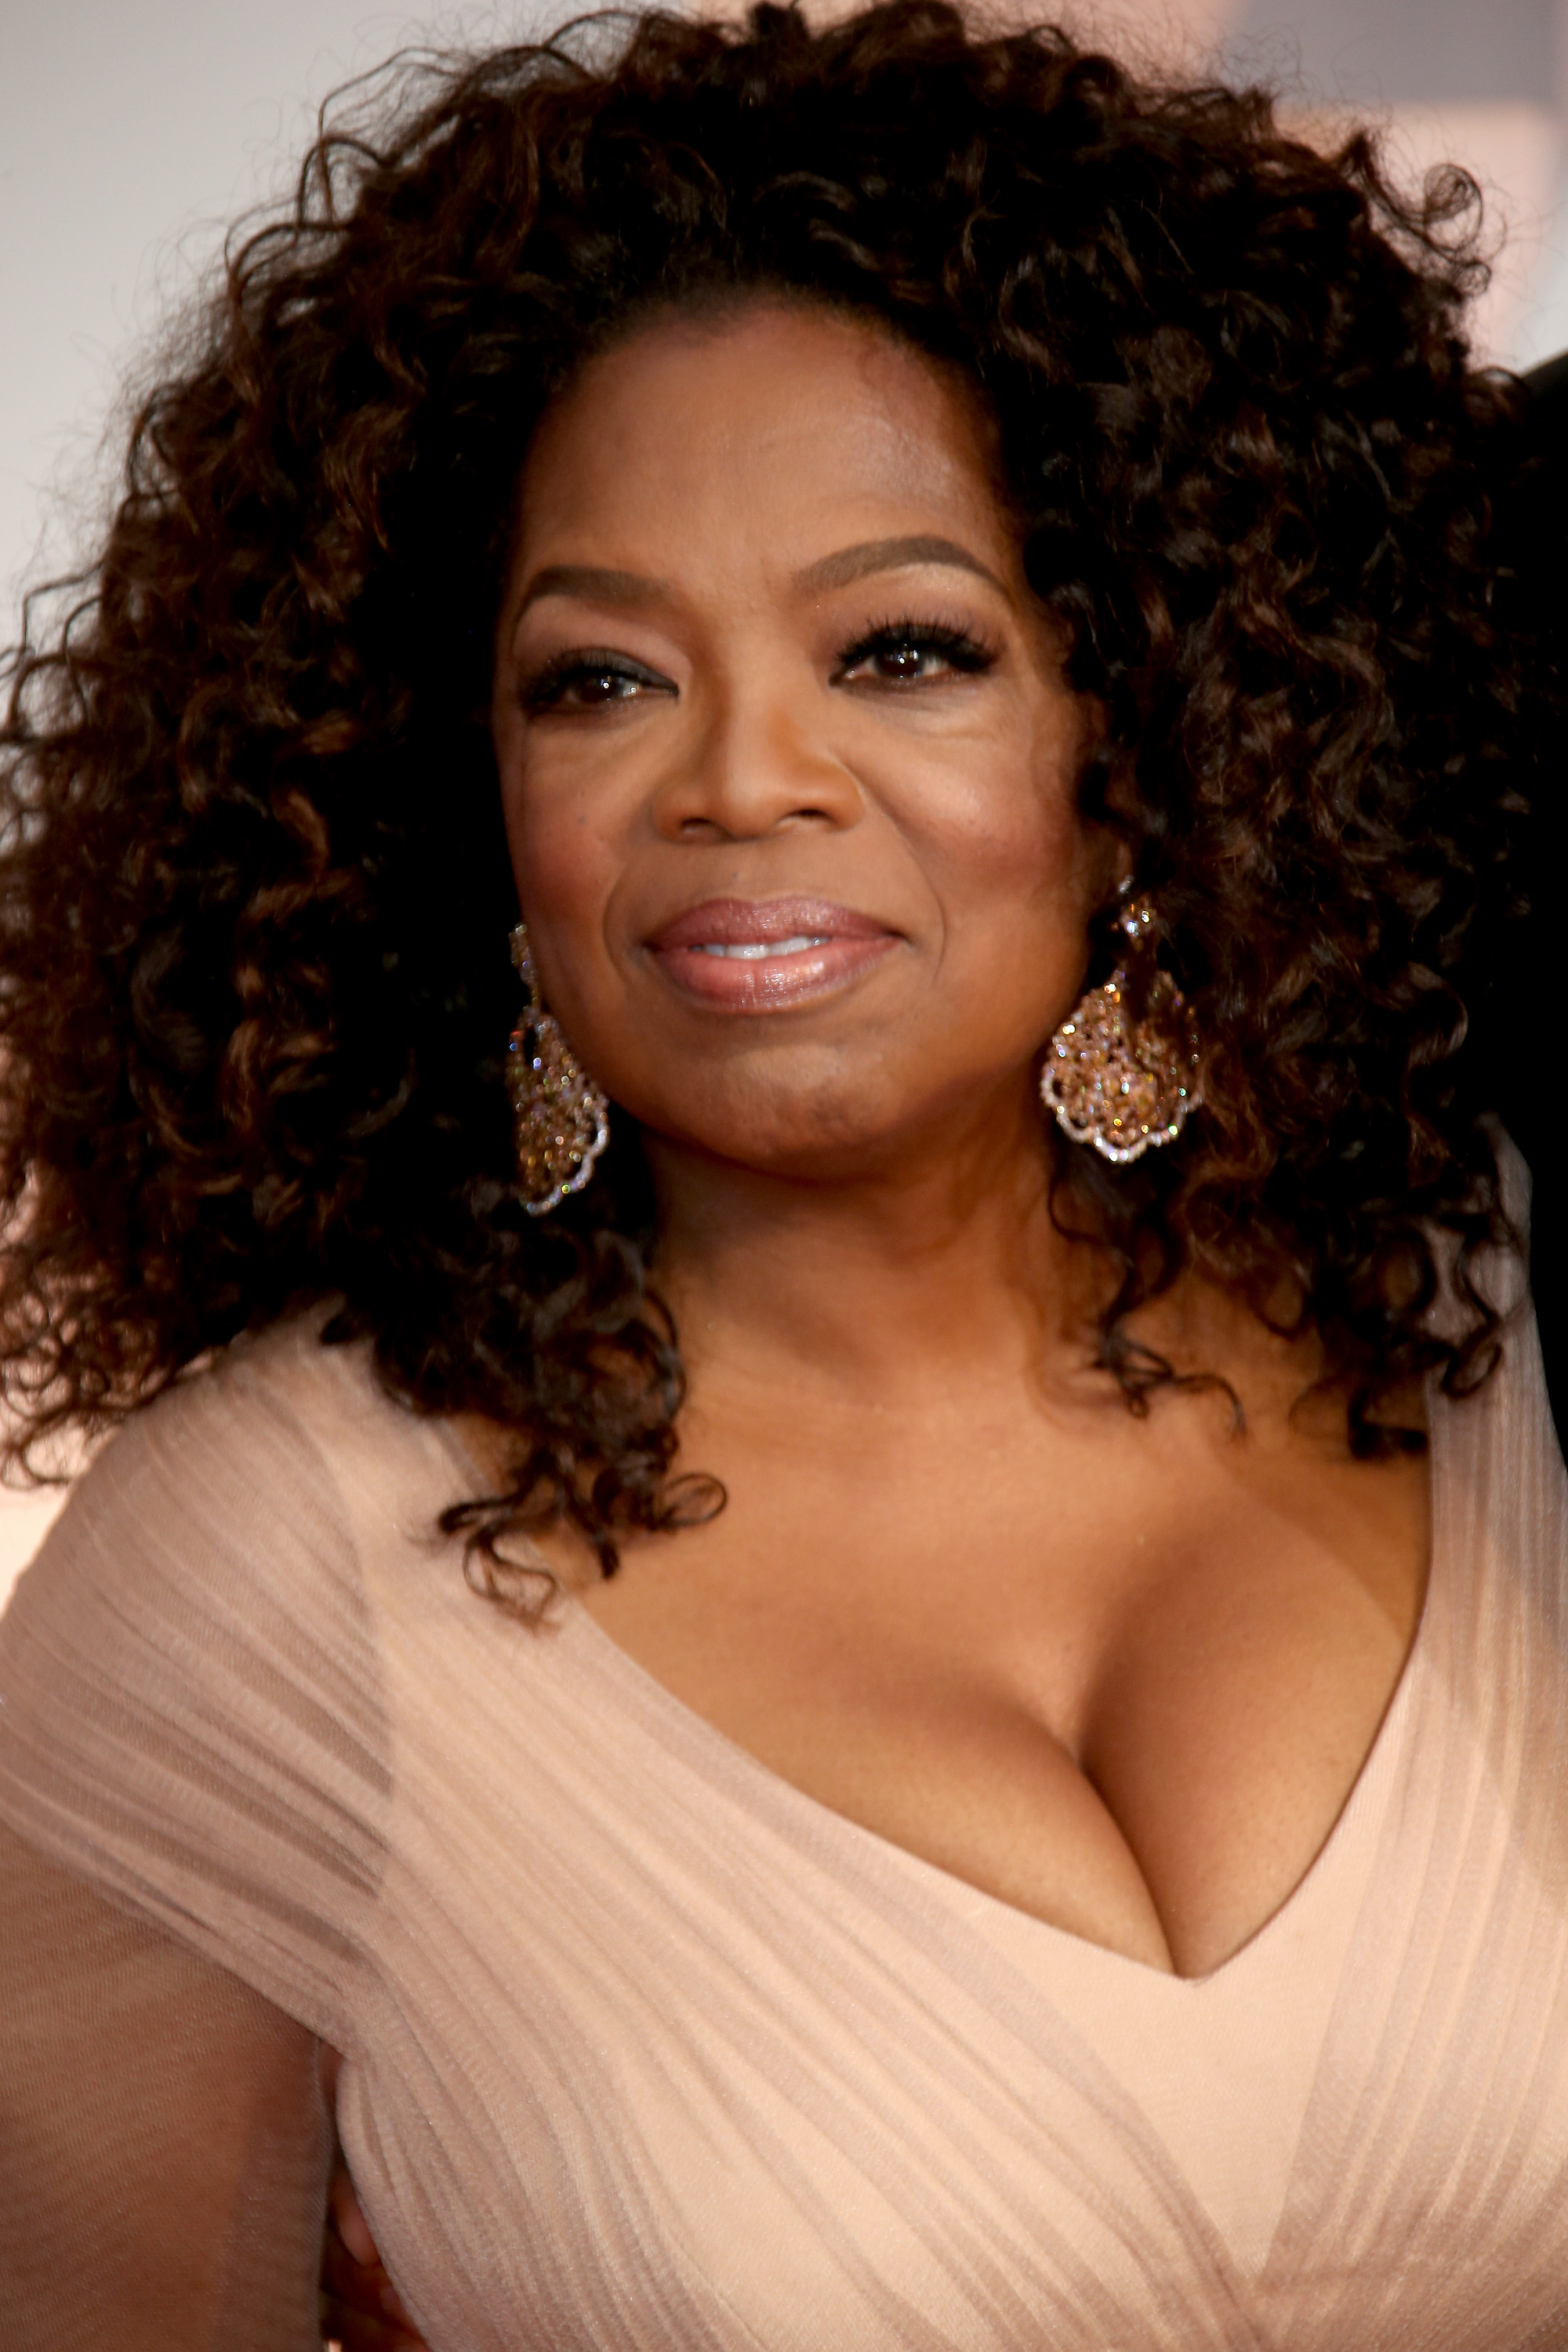 HOLLYWOOD, CA - FEBRUARY 22: Oprah Winfrey arrives at the 87th Annual Academy Awards at Hollywood &amp; Highland Center on February 22, 2015 in Los Angeles, California. (Photo by Dan MacMedan/WireImage) *** Local Caption *** Oprah Winfrey